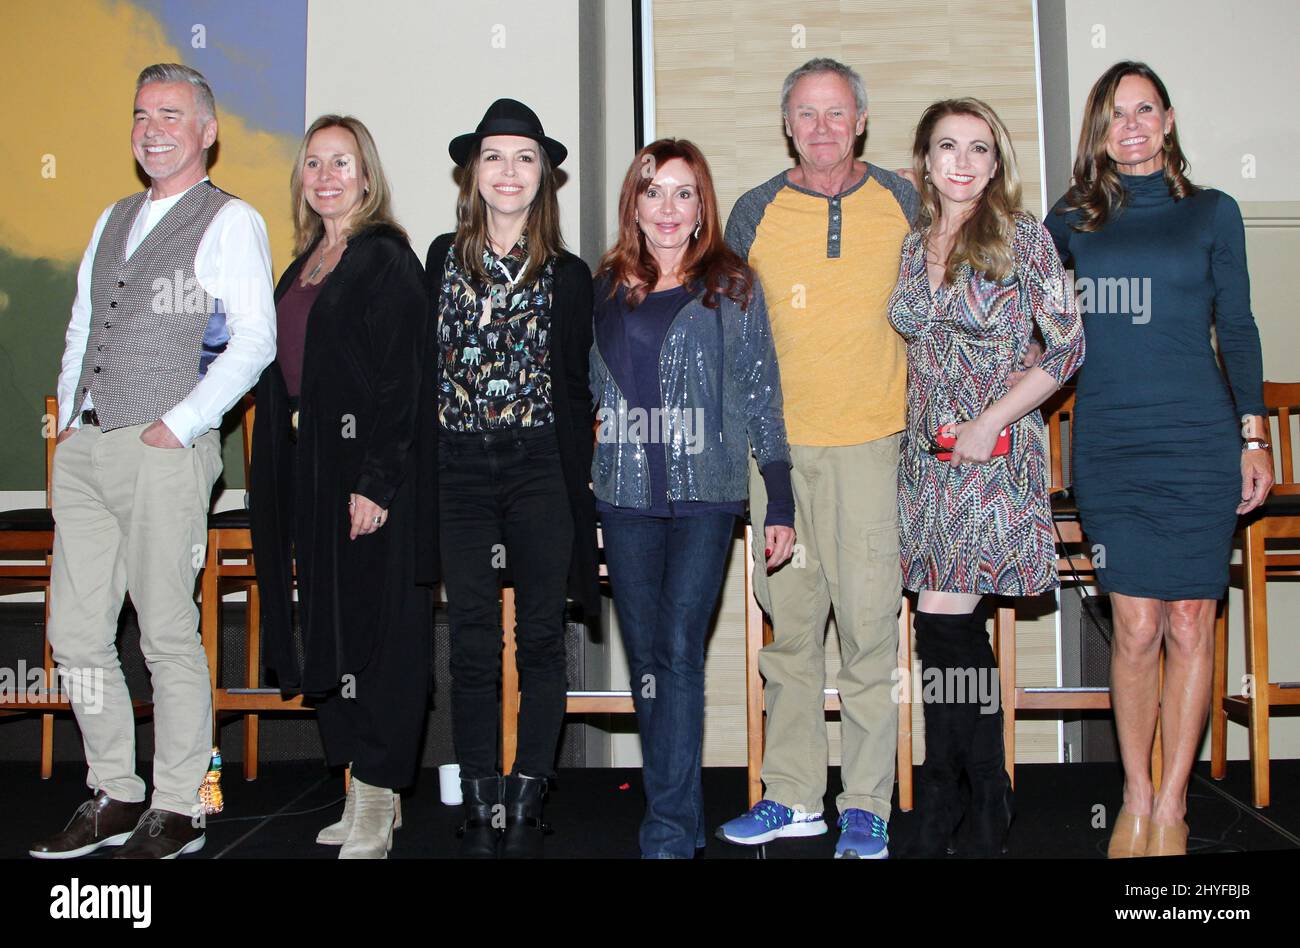 Ian Buchanan, Genie Francis, Finola Hughes, Jackie Zeman, Trista at the Legends of General Hospital fan event held at the Holiday Inn Boston Bunker Hill on May 6, 2018 in Boston, MA. Stock Photo